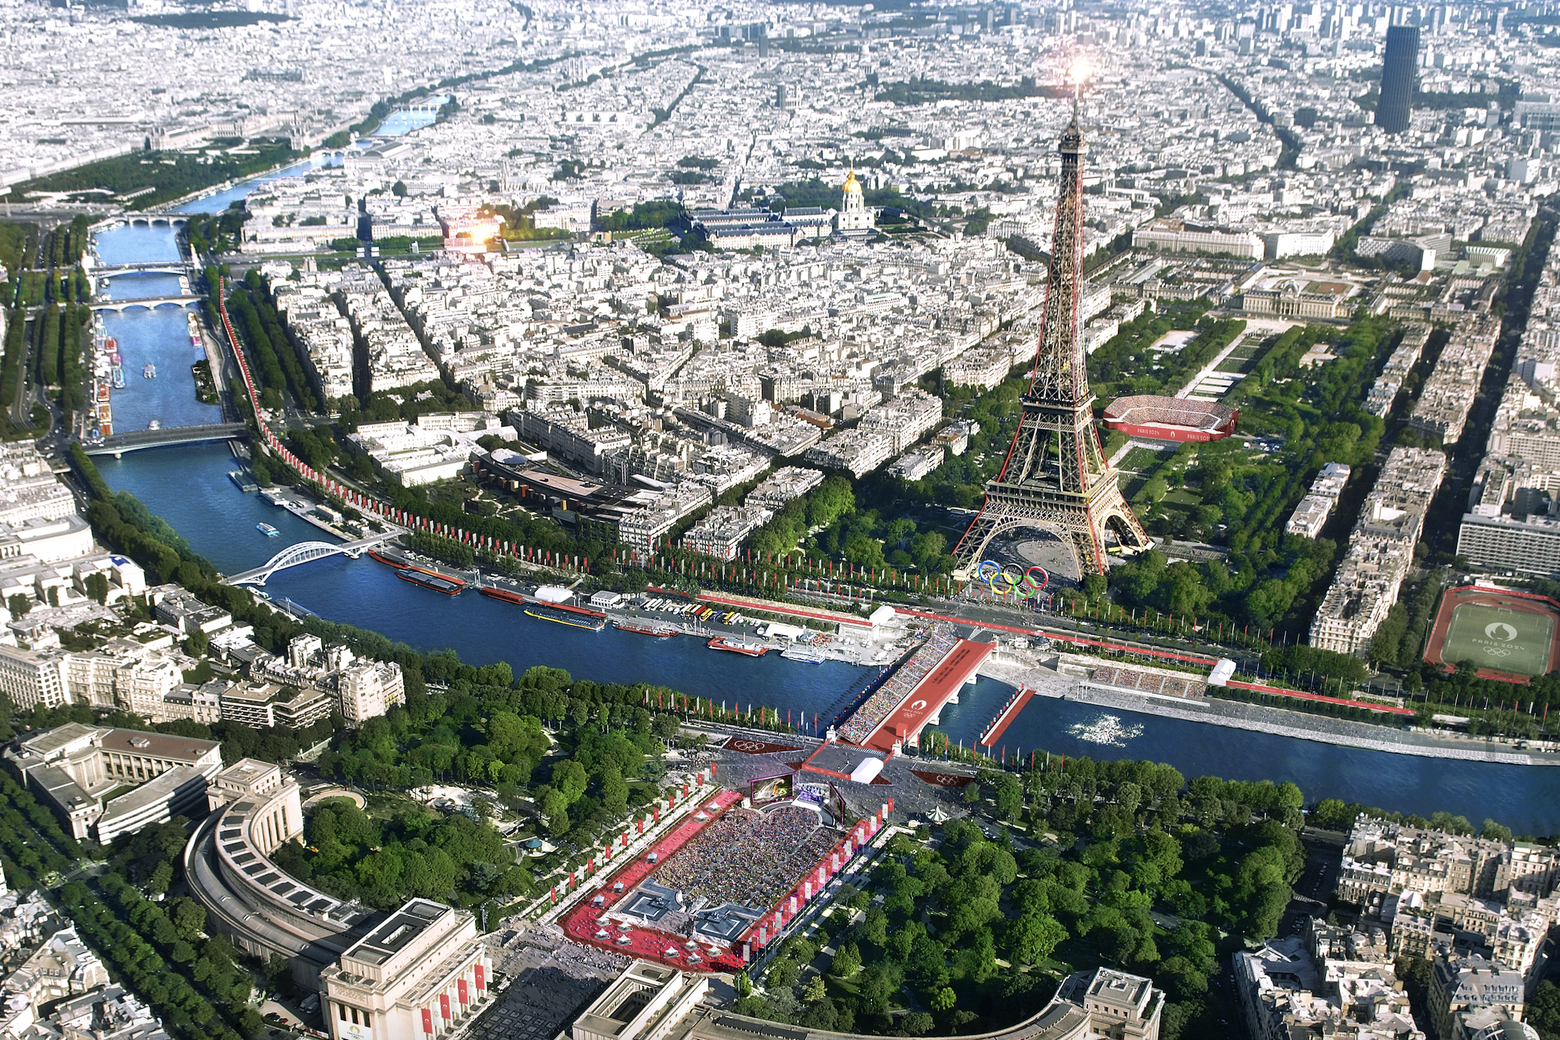 Paris 2024: here is the complete map of Olympics venues